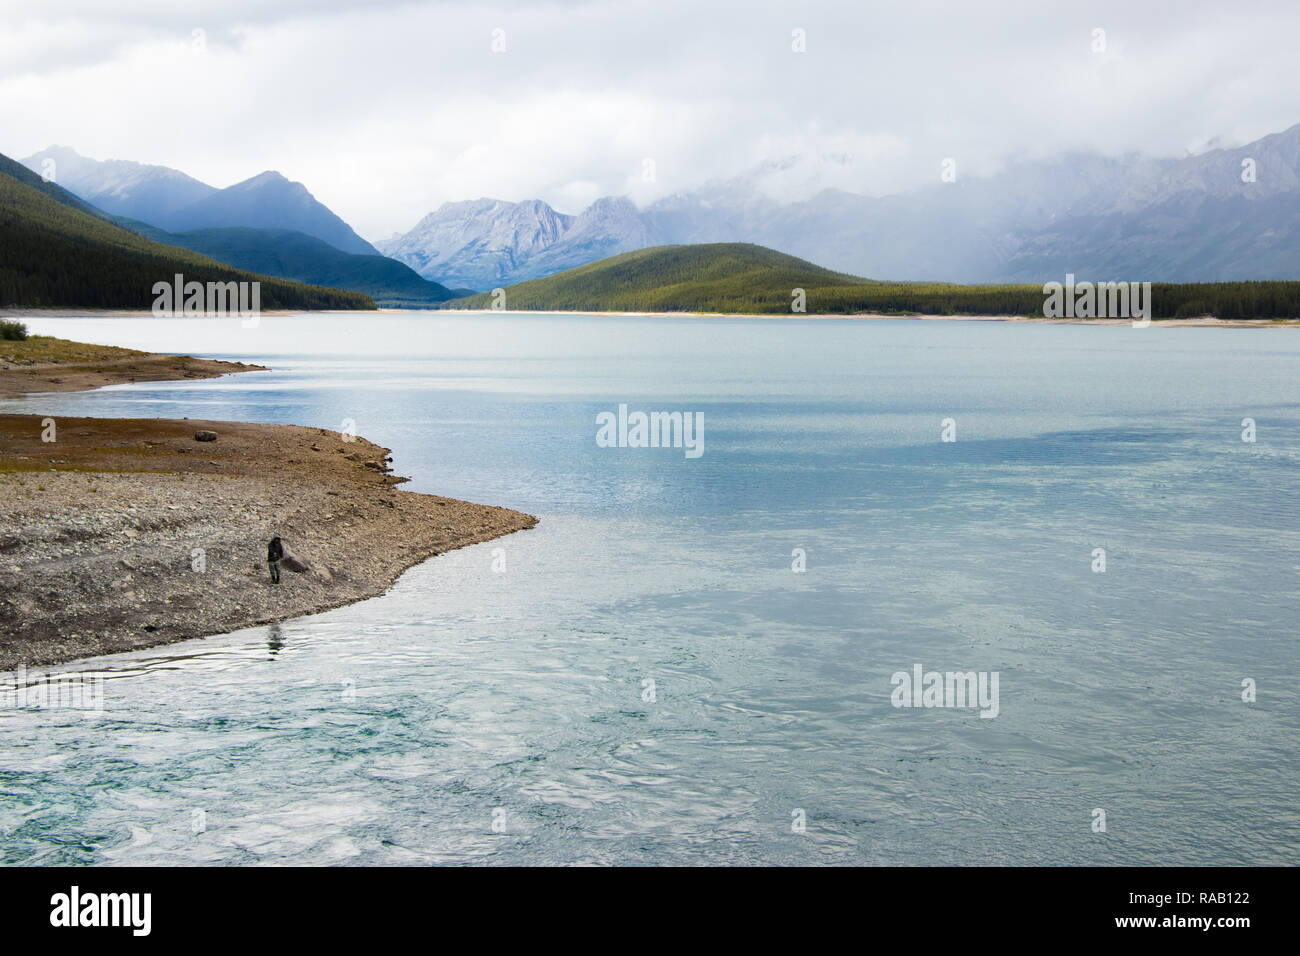 Kananaskis Lower Lake - Rocky Mountains in Summer in a cloudy day and fisherman on the lakeshore - Alberta, Canada Stock Photo